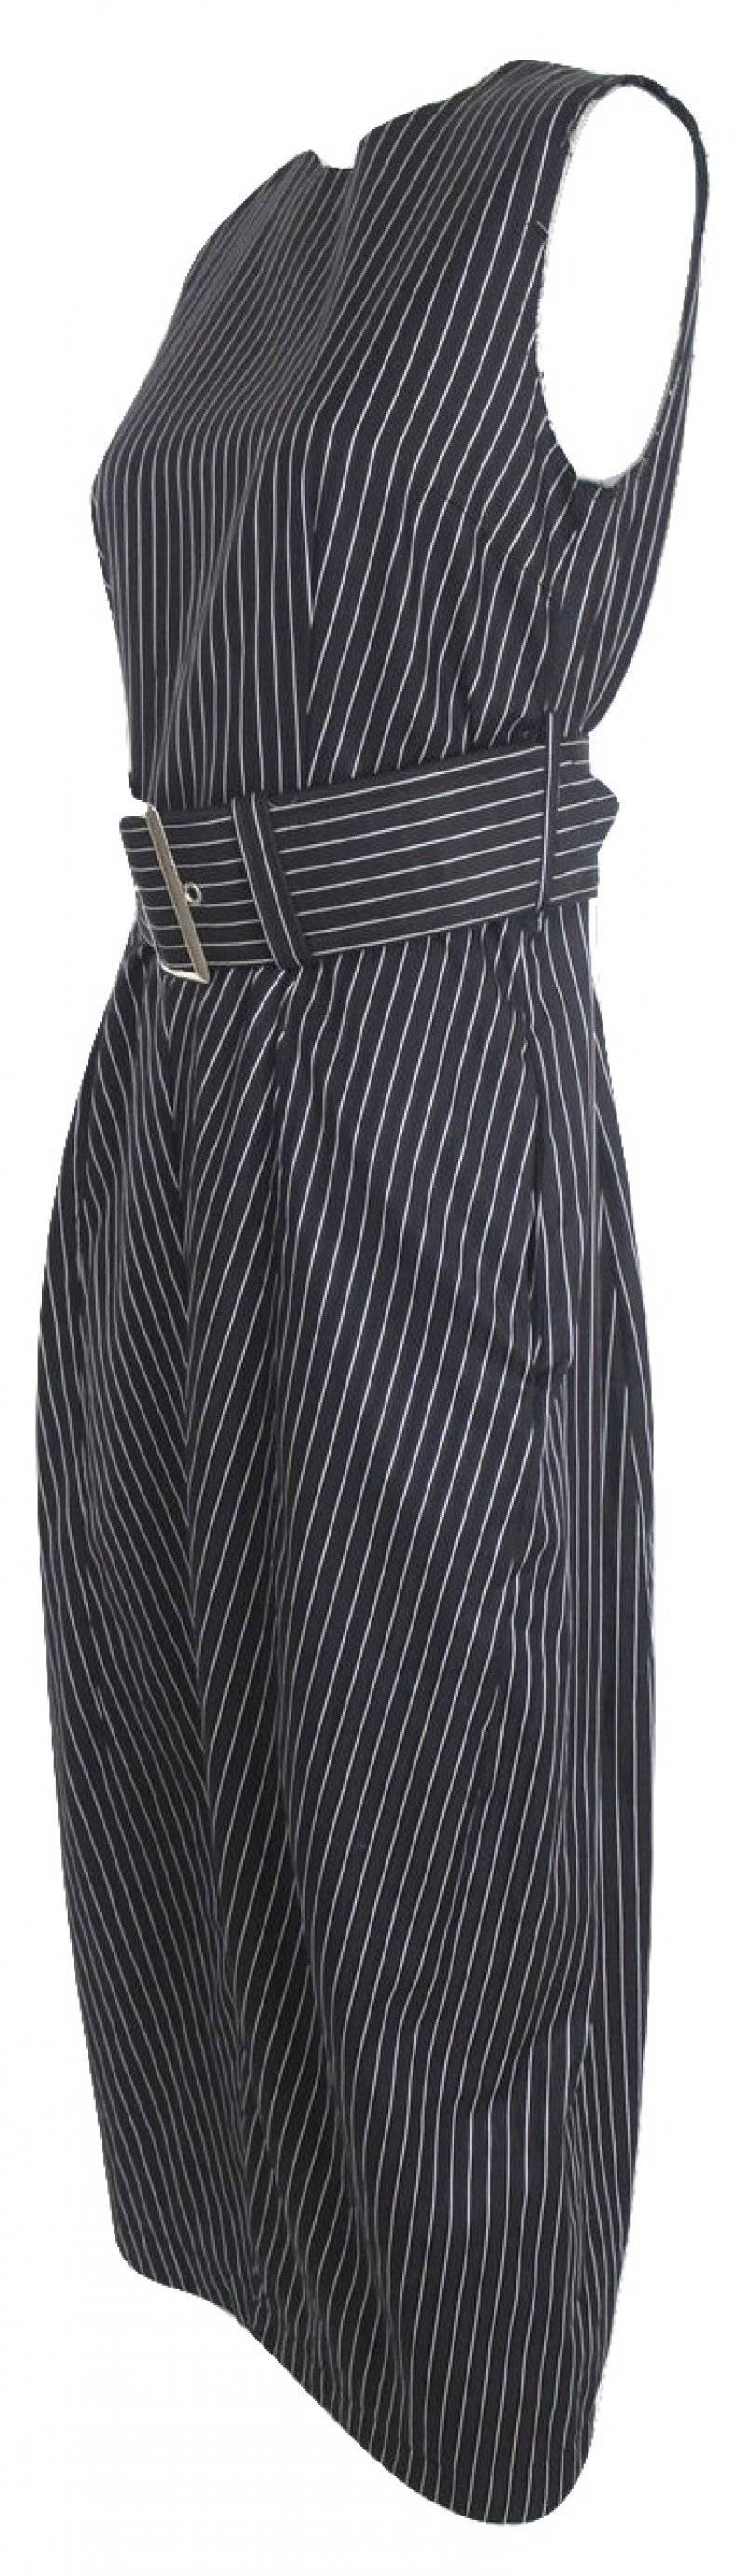 Comme des Garcons 2010 Collection Runway Pinstripe Dress 3